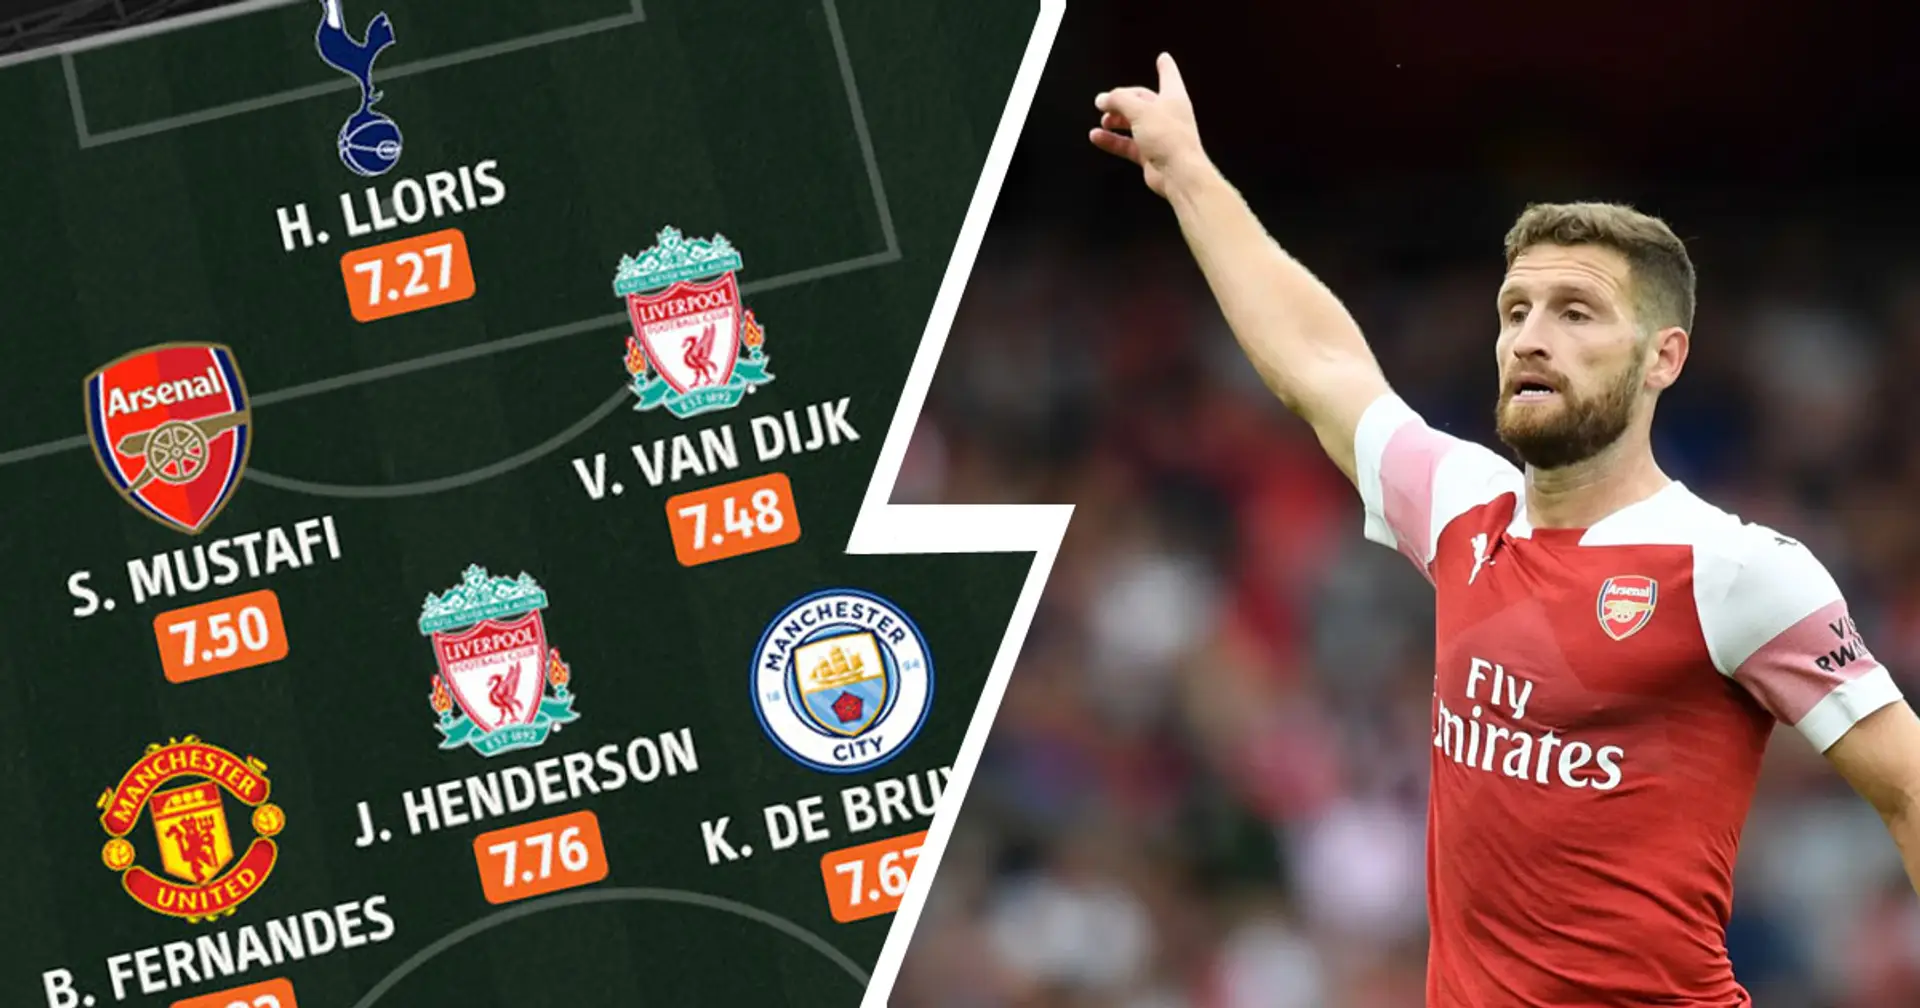 Mustafi named in WhoScored team of 2020 and his rating is better than van Dijk's